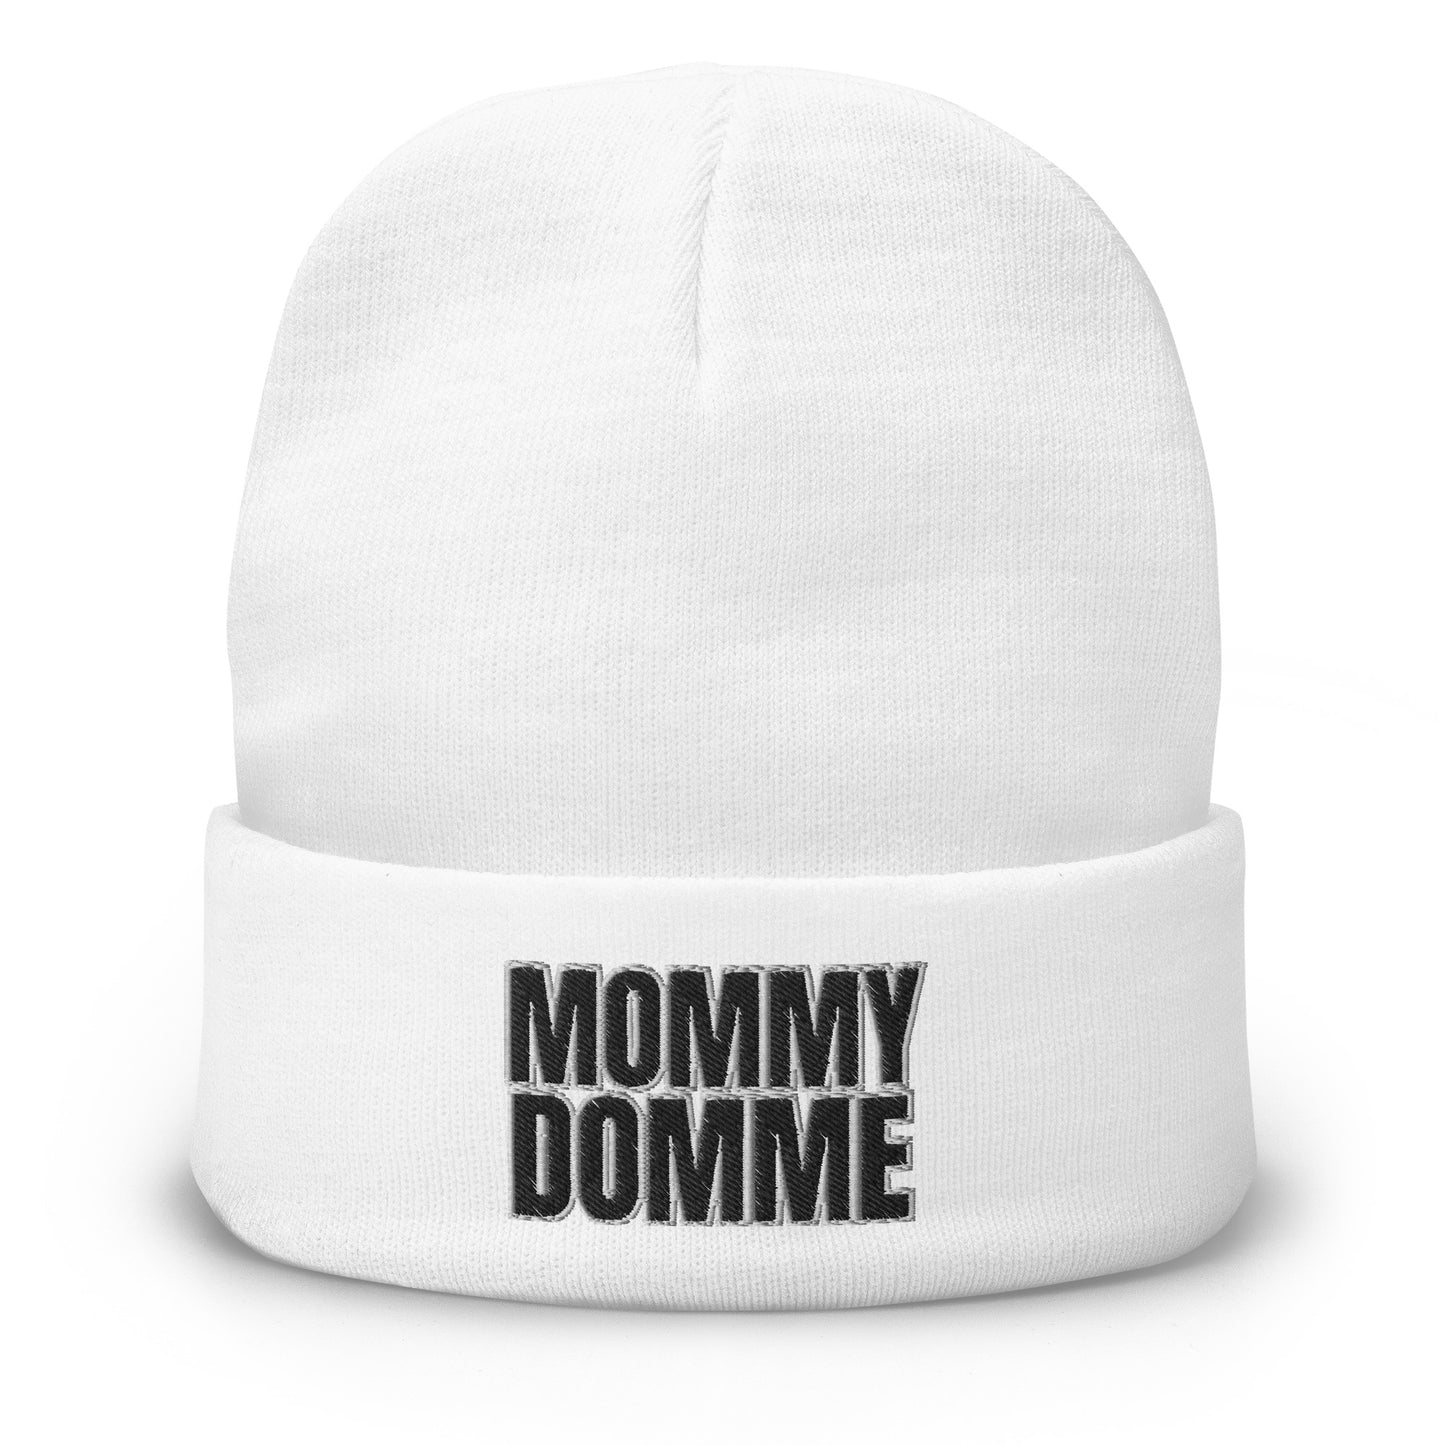 Domme Mommy Beanie